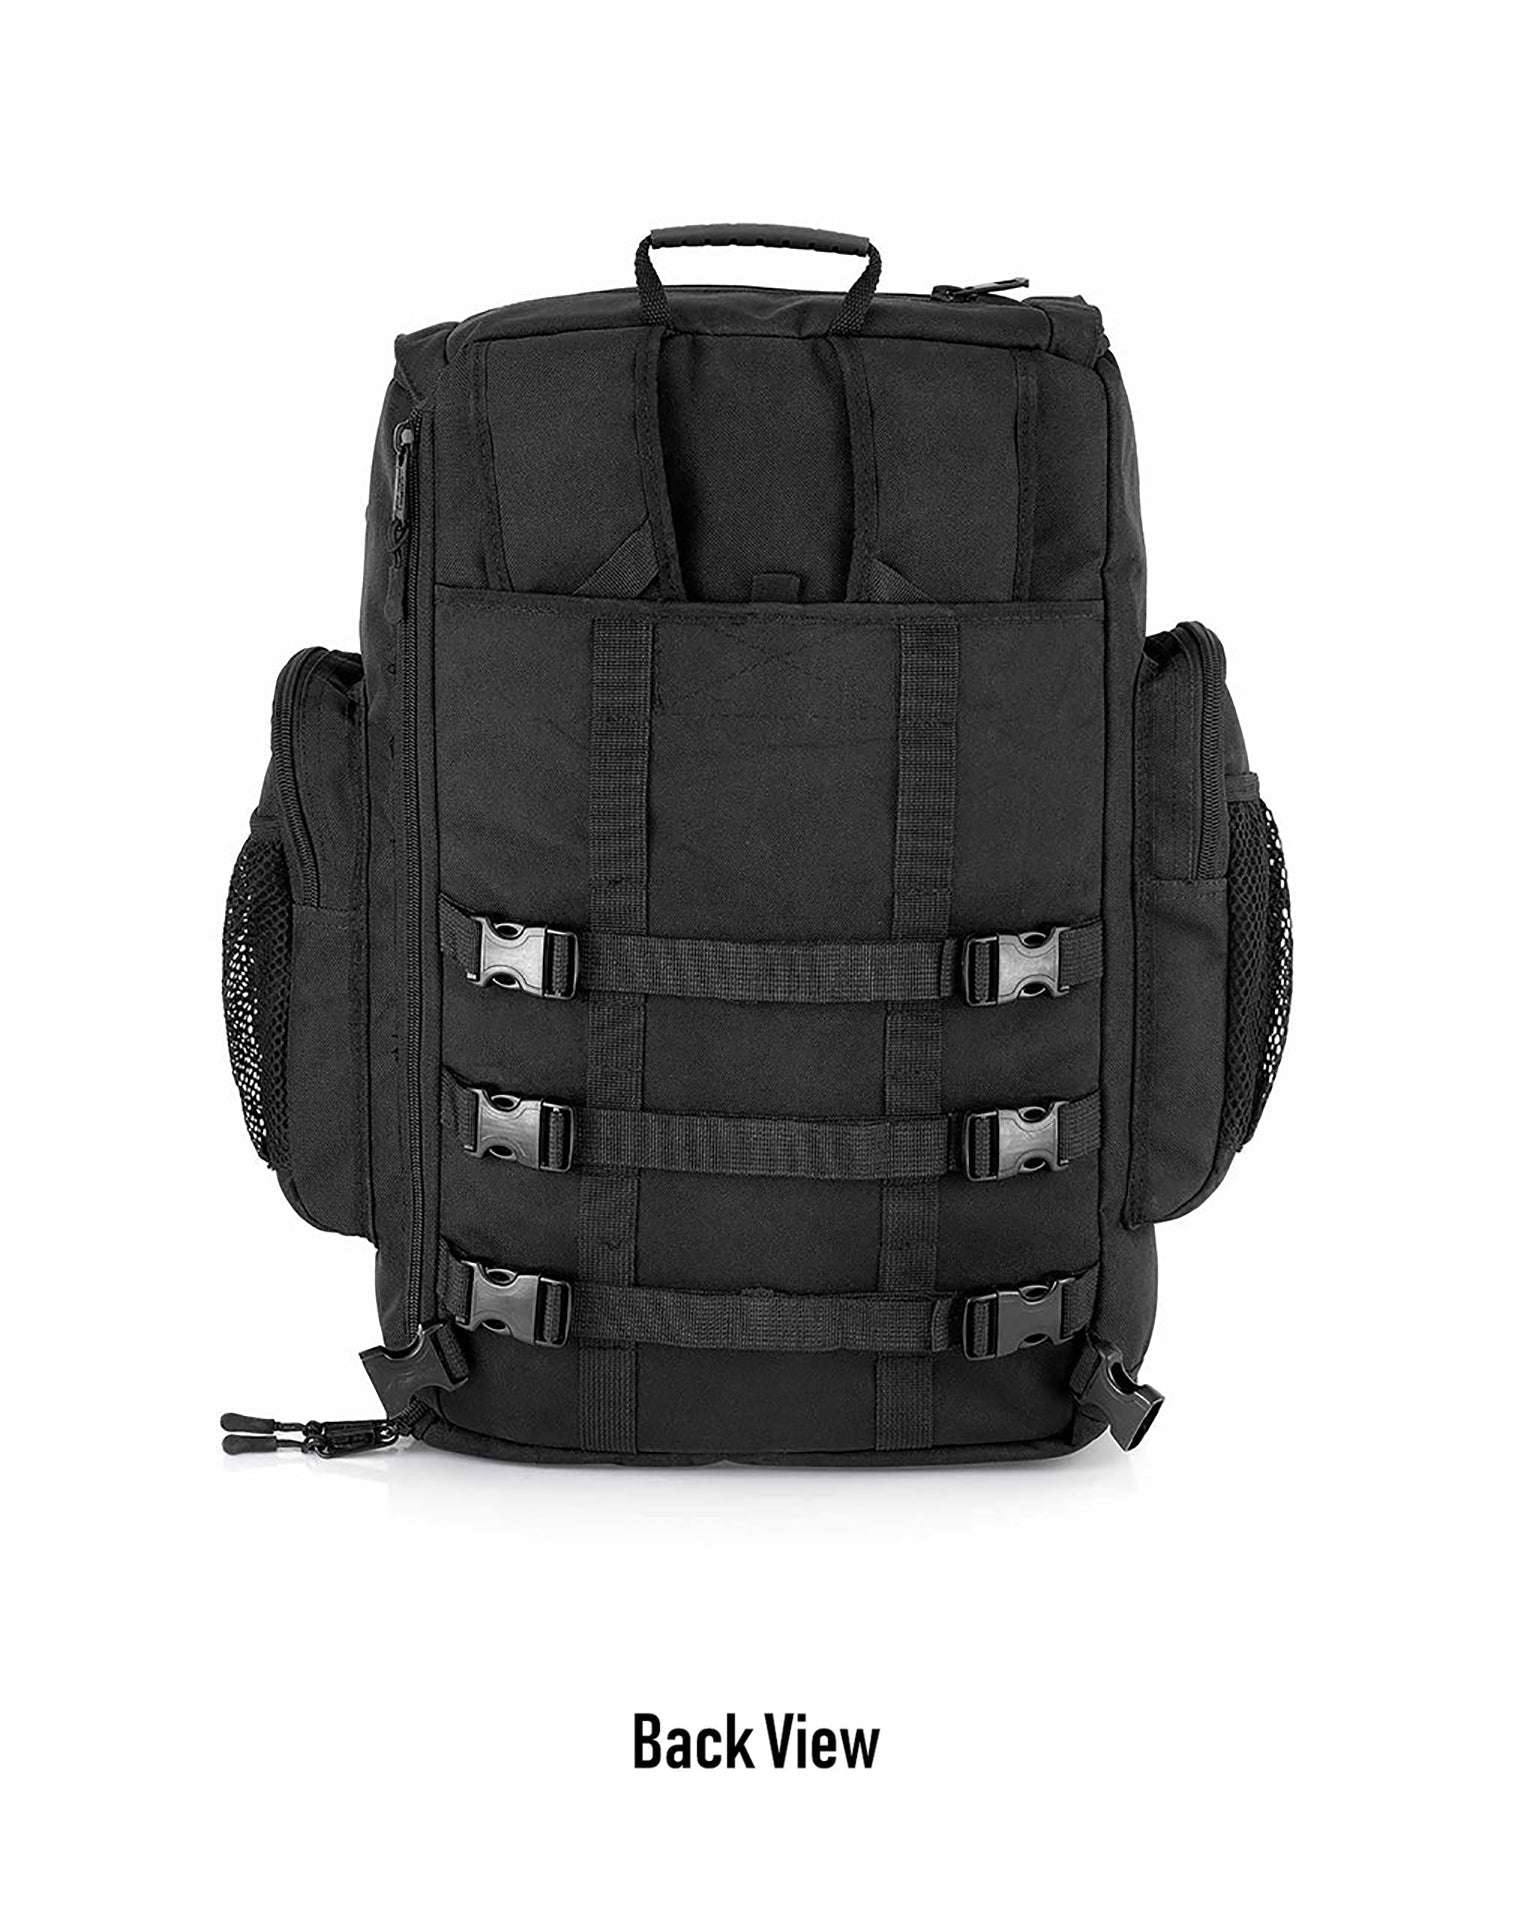 32L - Trident Large Honda Motorcycle Backpack